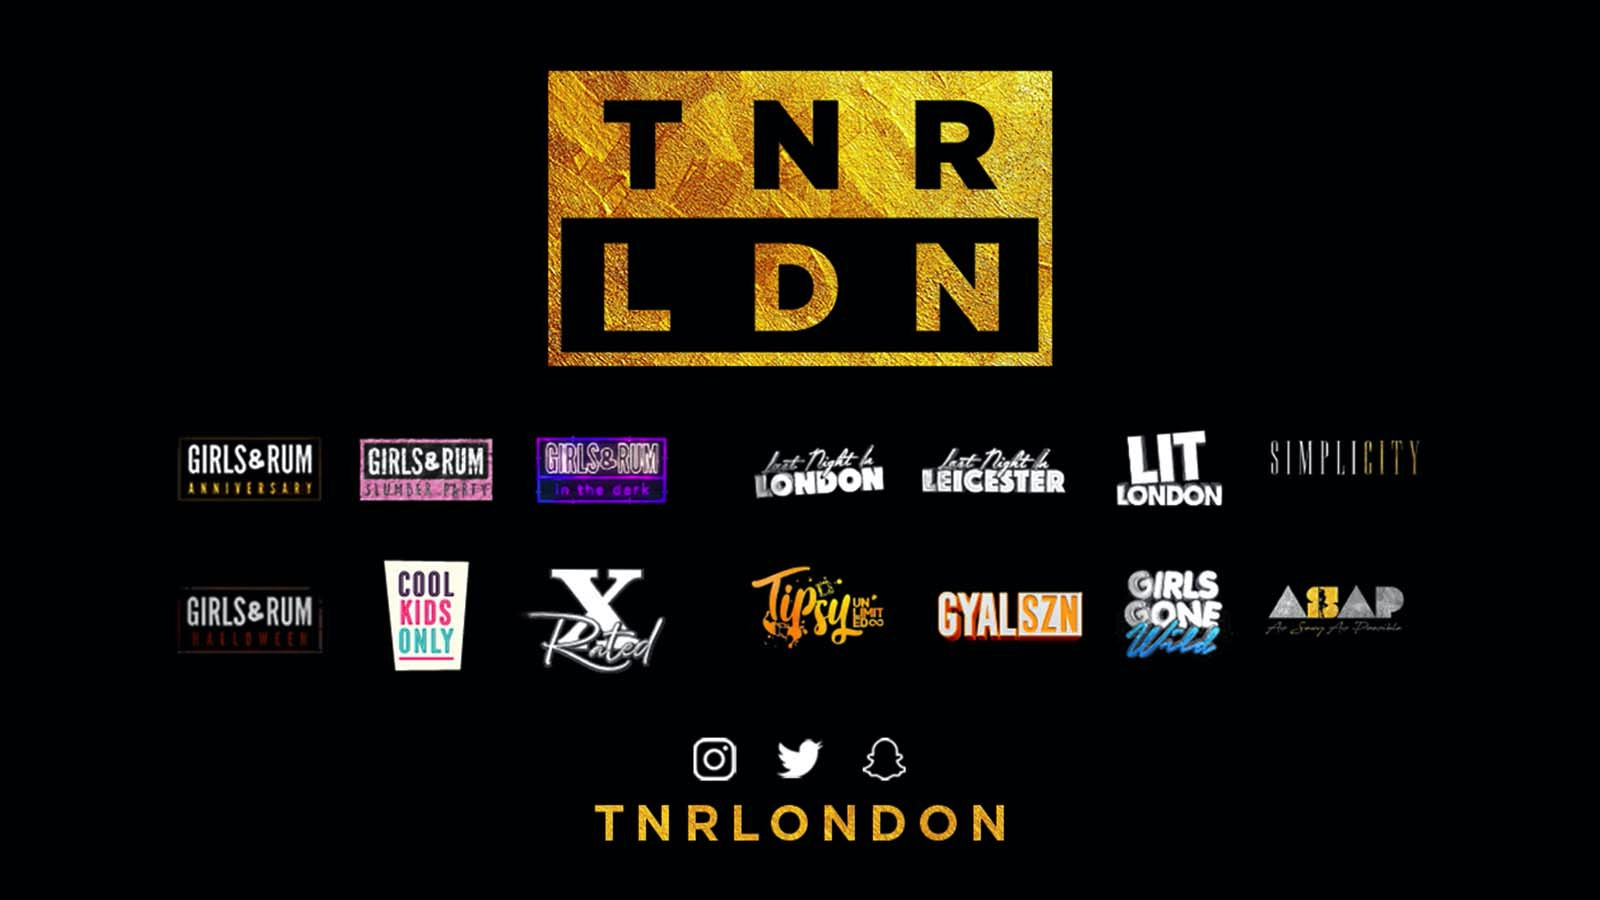 Tnr Ldn Event Information And Tickets